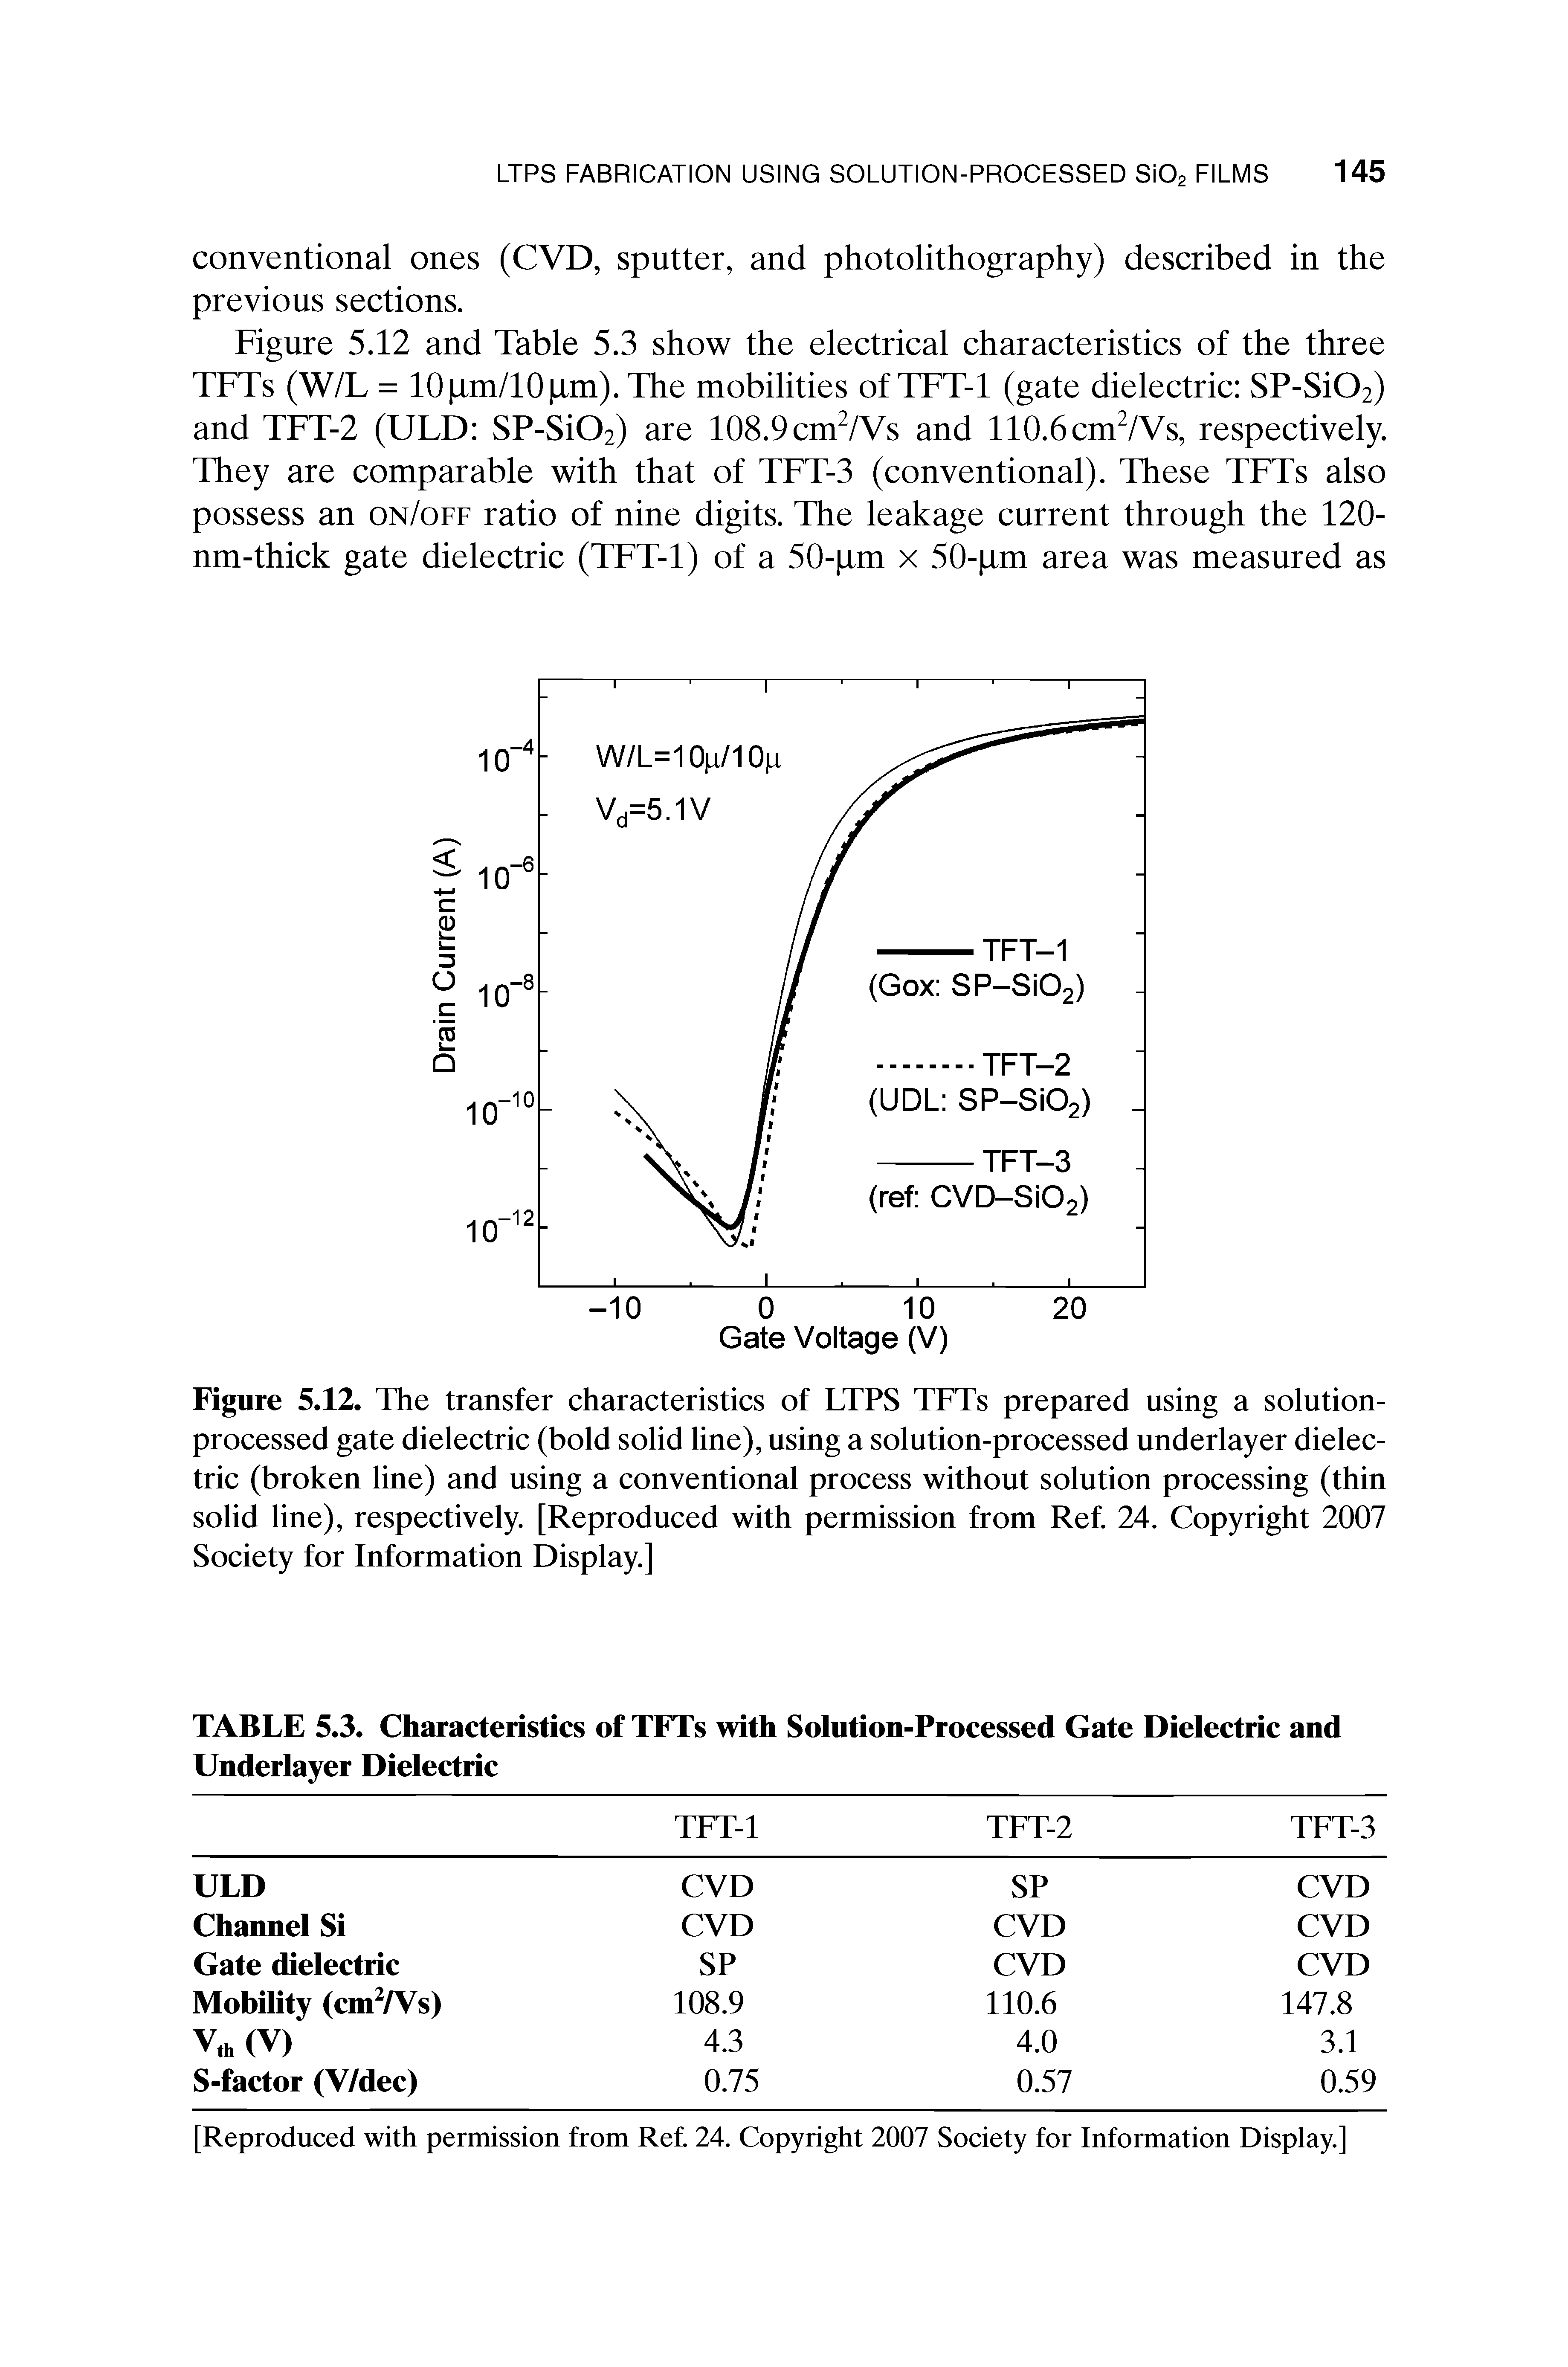 Figure 5.12. The transfer characteristics of LTPS TFTs prepared using a solution-processed gate dielectric (bold solid line), using a solution-processed underlayer dielectric (broken line) and using a conventional process without solution processing (thin solid line), respectively. [Reproduced with permission from Ref. 24. Copyright 2007 Society for Information Display.]...